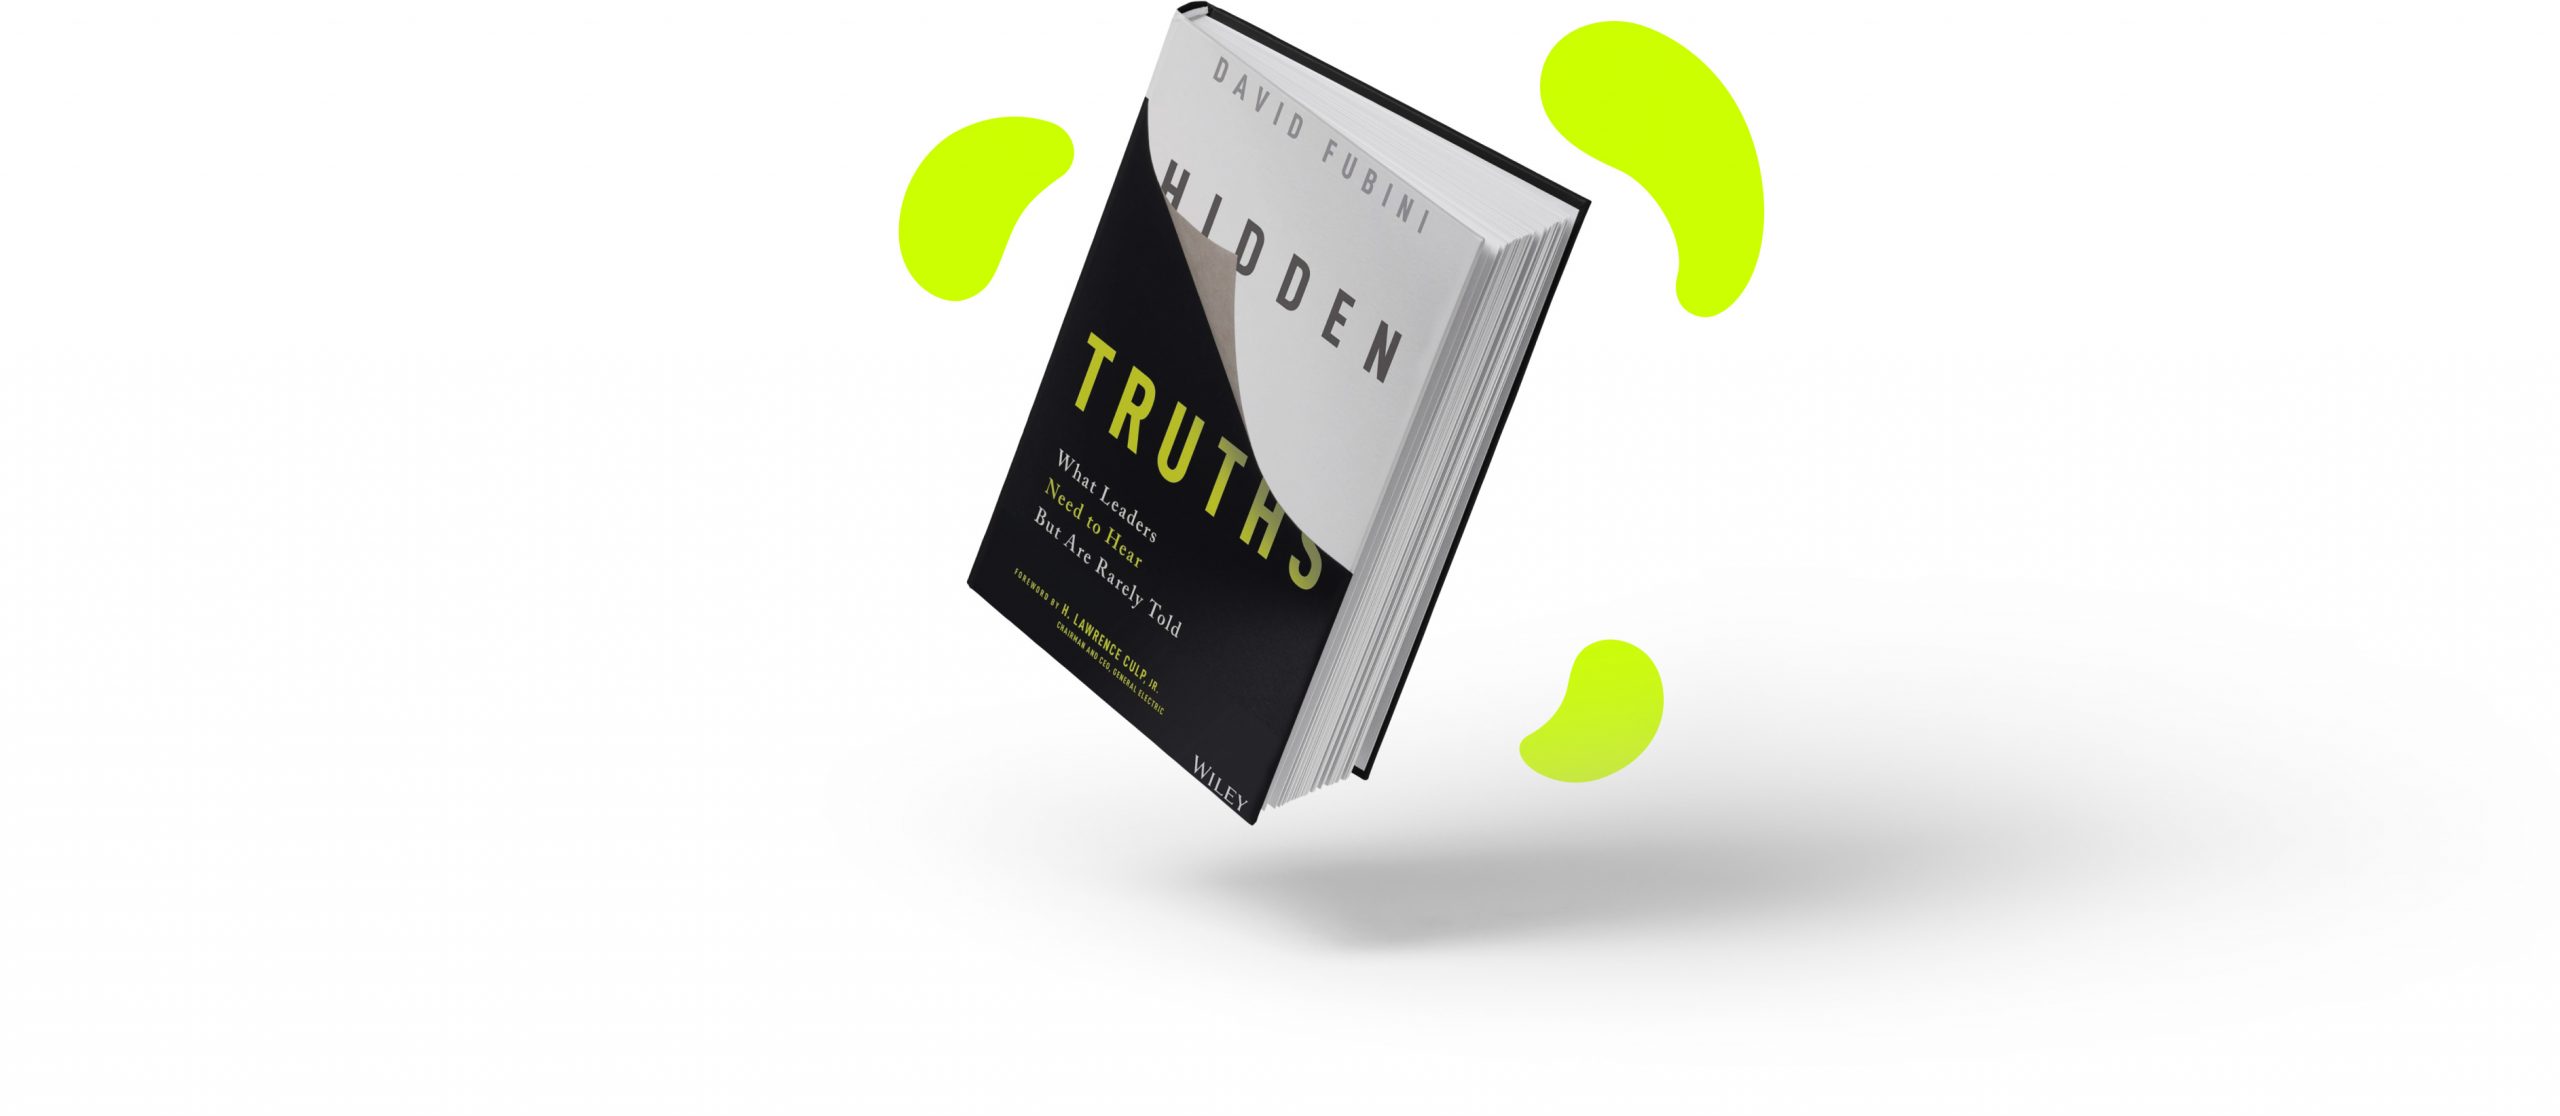 Hidden Truths: What Leaders Need to Hear But Are Rarely Told